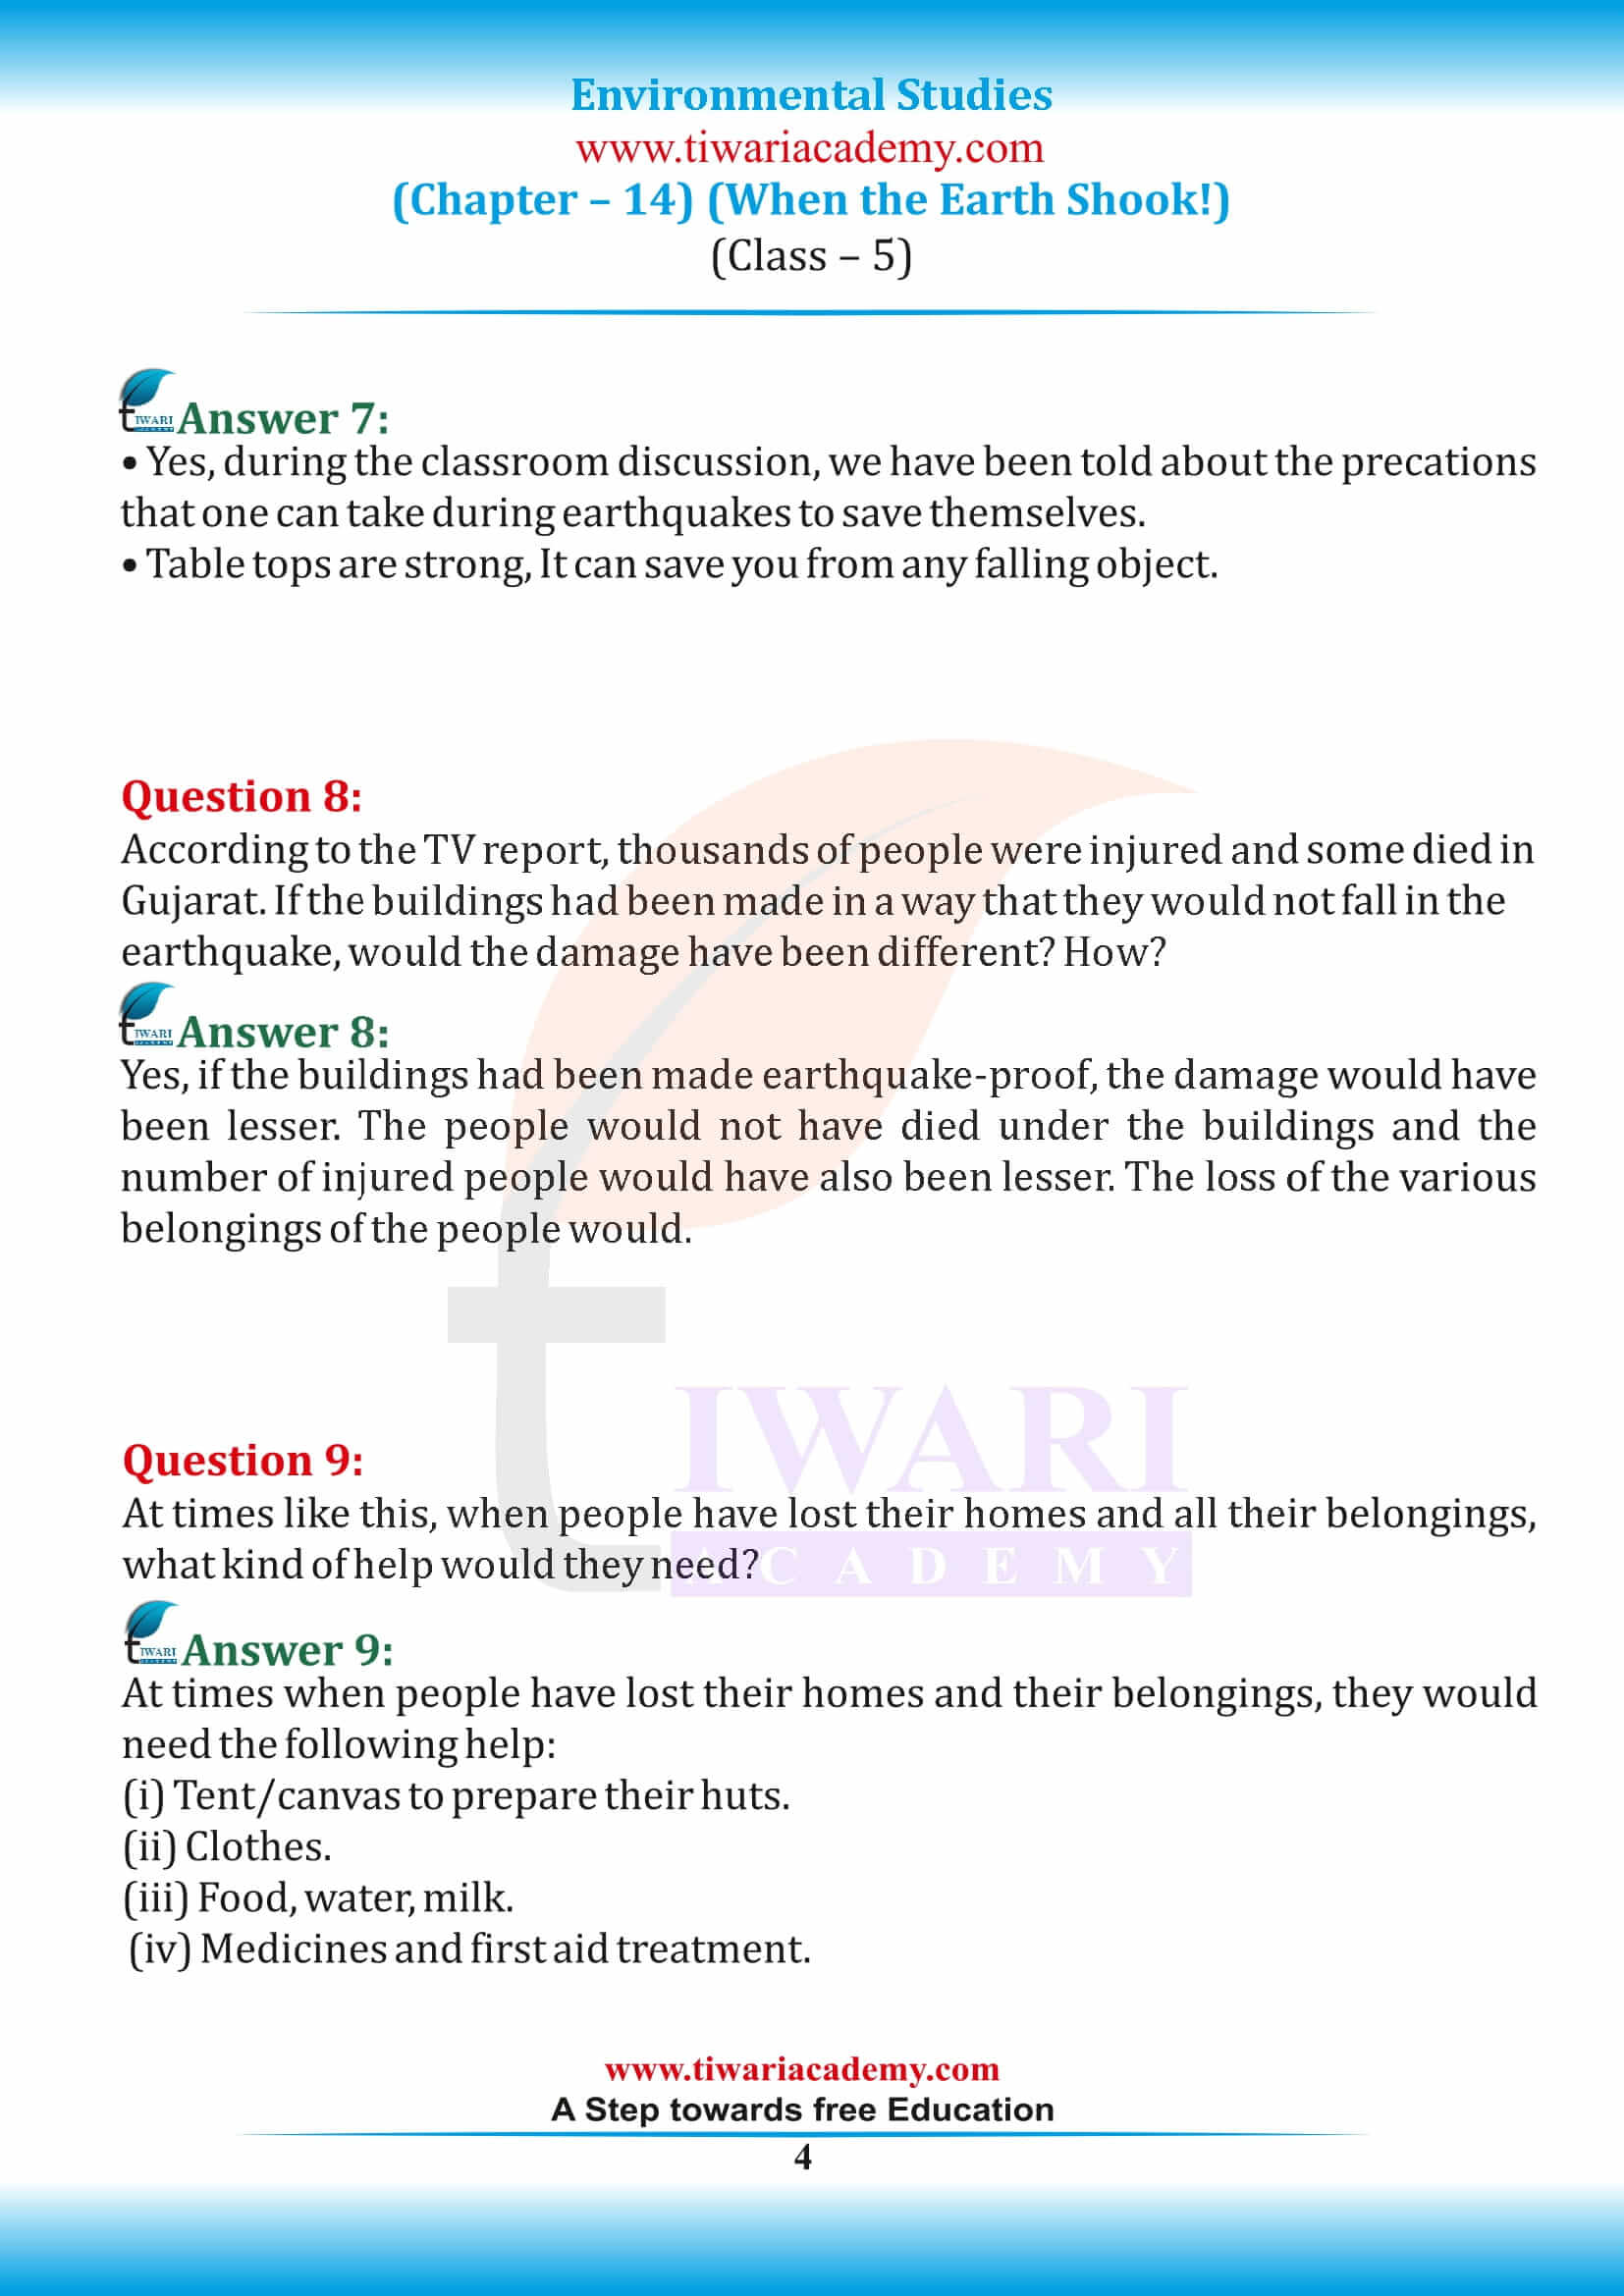 NCERT Solutions for Class 5 EVS Chapter 14 in English Medium